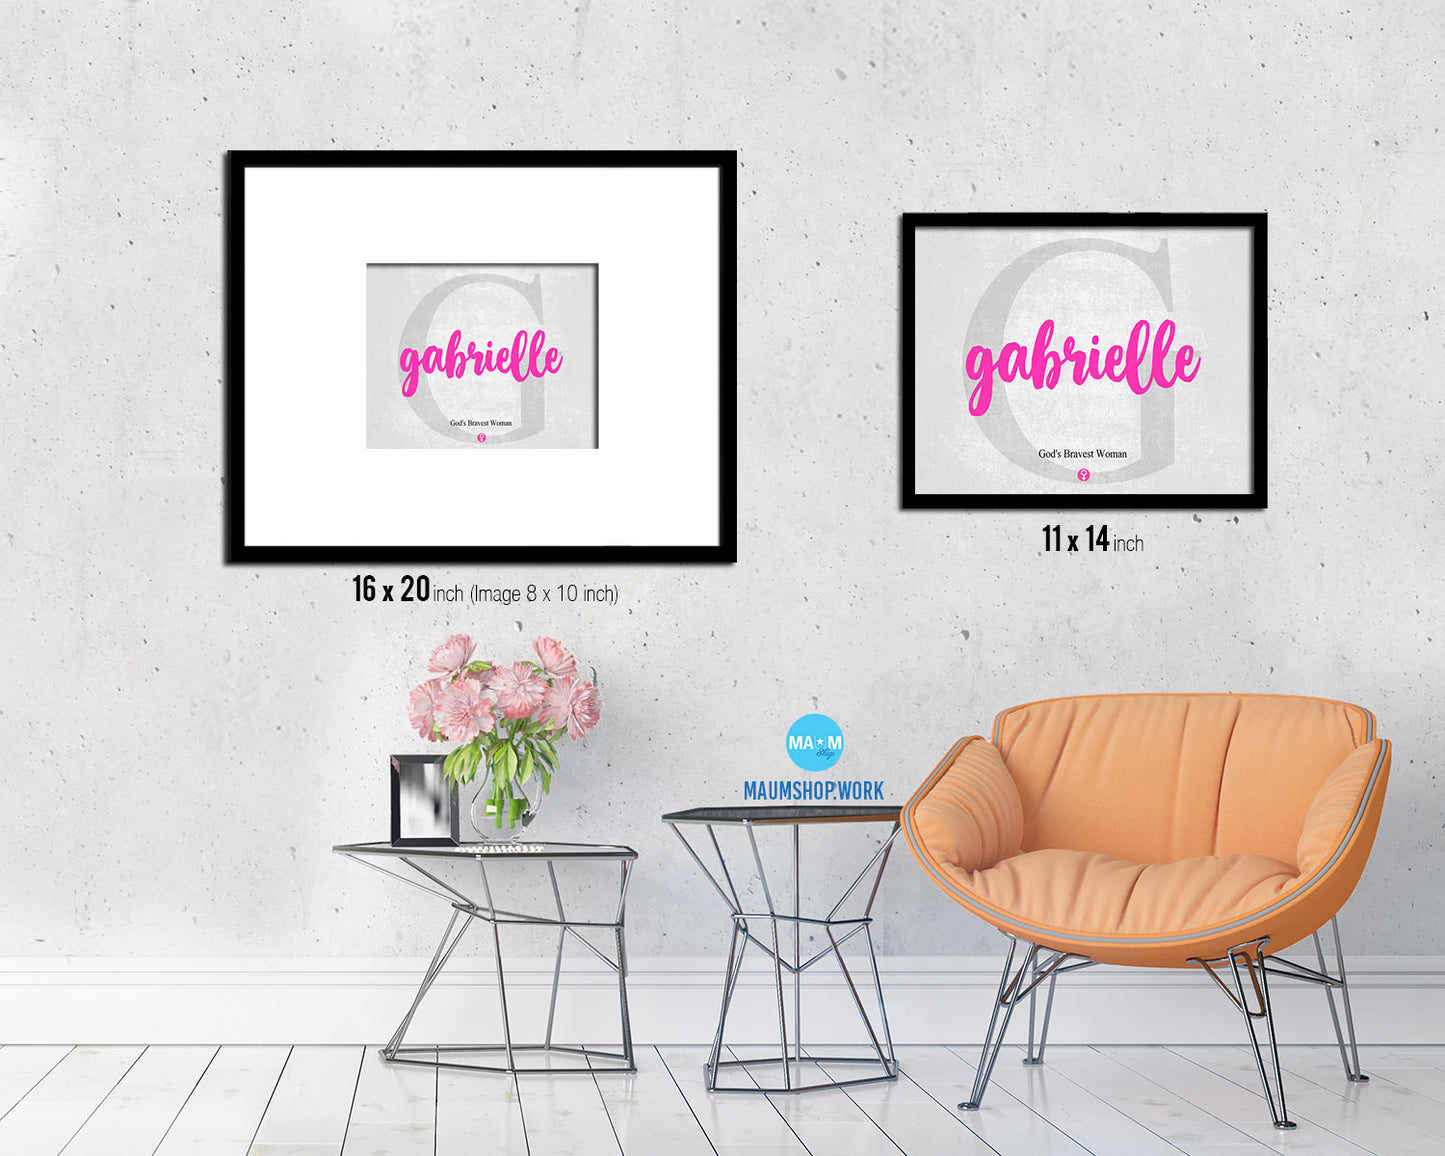 Gabrielle Personalized Biblical Name Plate Art Framed Print Kids Baby Room Wall Decor Gifts